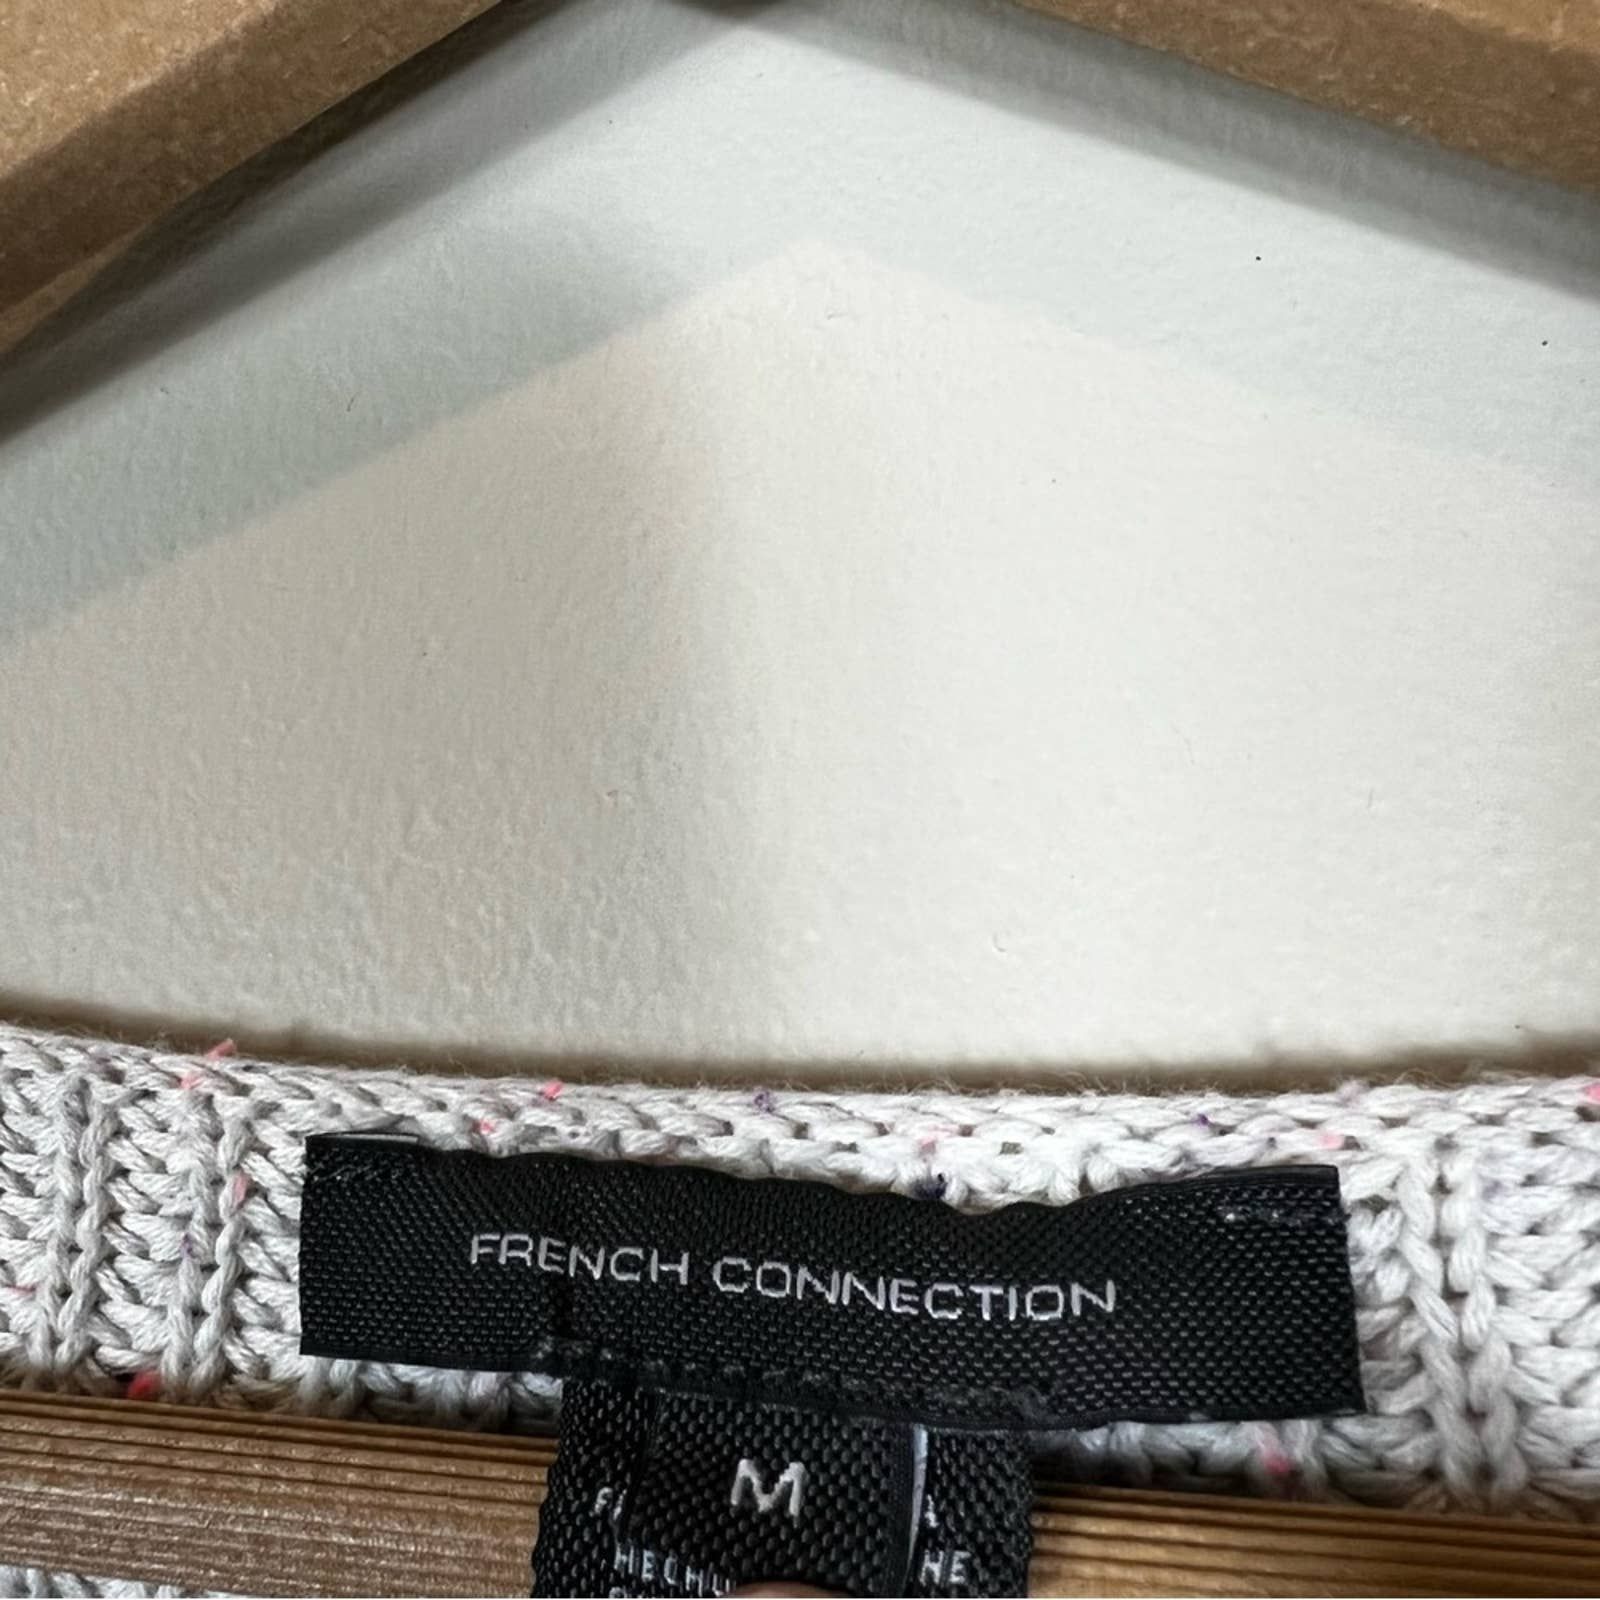 French Connection French Connection Flecked Cream Millie Mozart Sweater Size M / US 6-8 / IT 42-44 - 6 Thumbnail